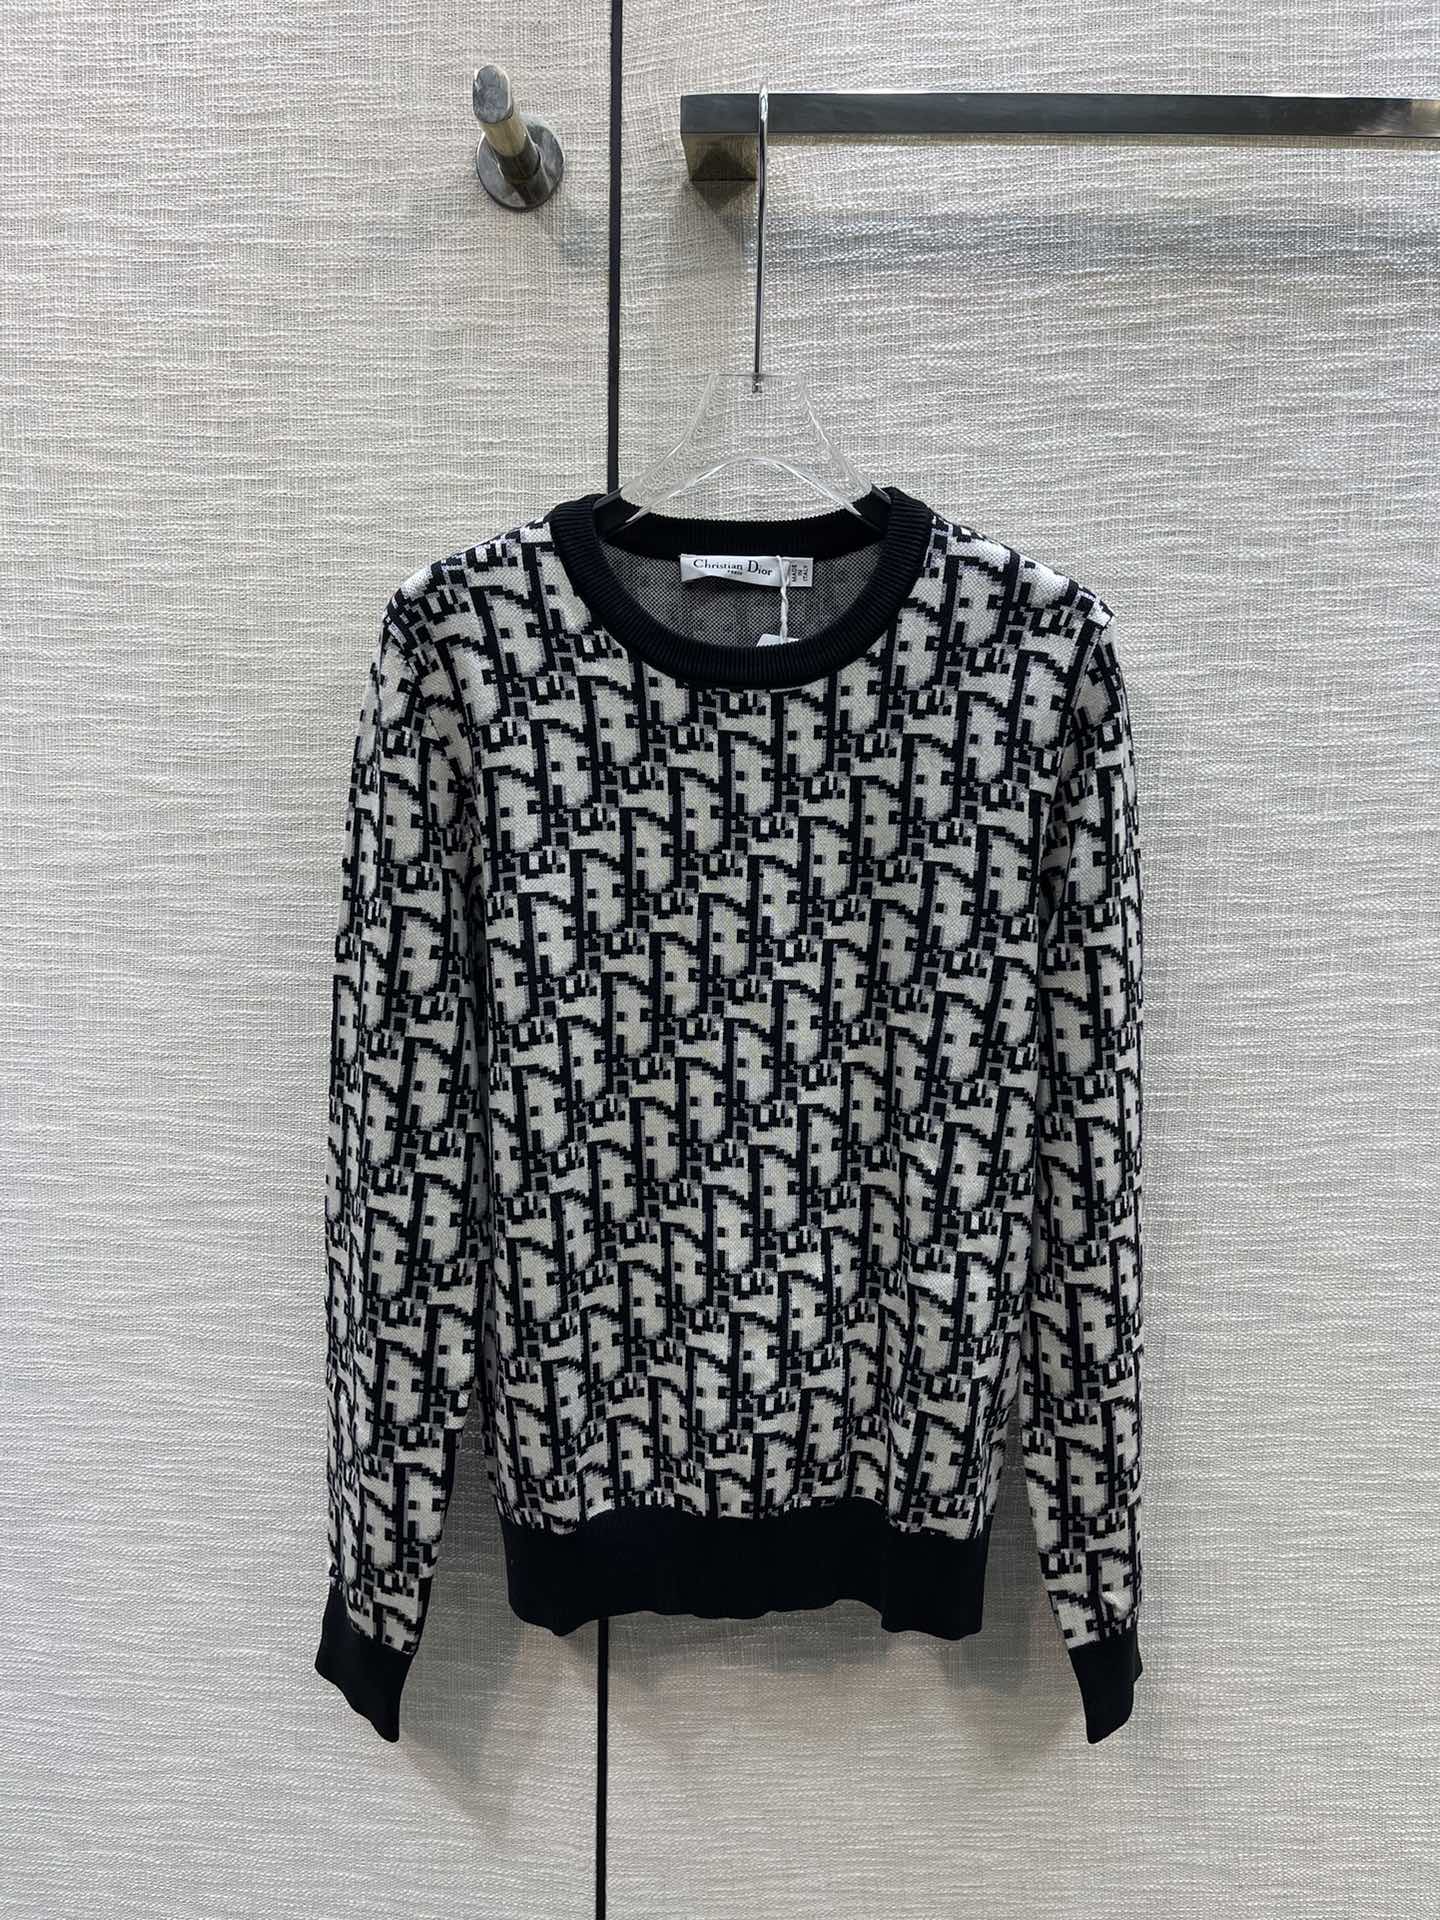 Buying Replica Dior Clothing Sweatshirts Replica Every Designer White Fall/Winter Collection